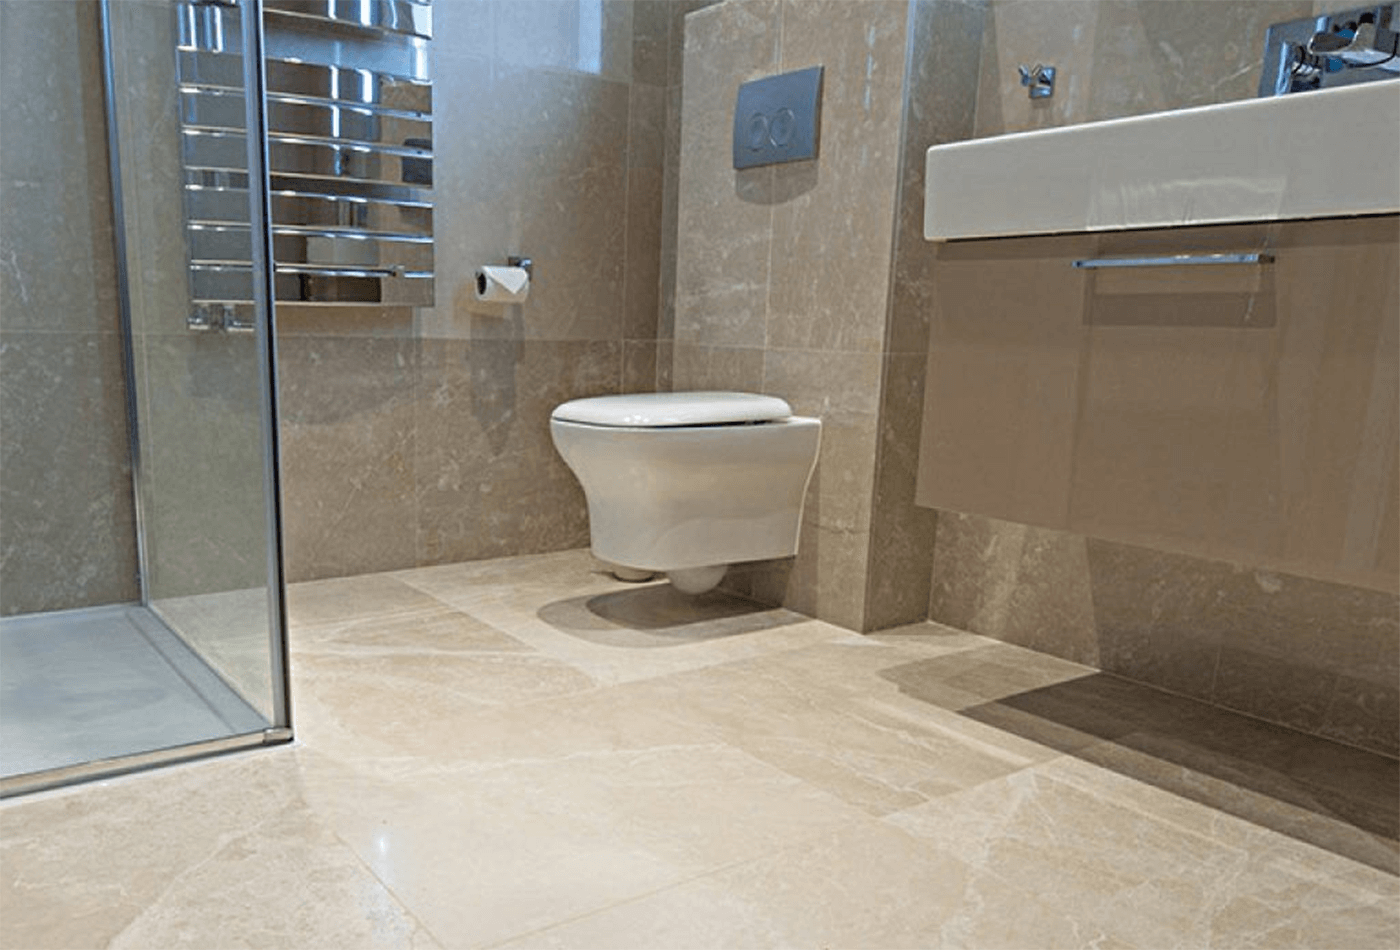 Do One Thing, Install Marble Flooring In The Bathroom